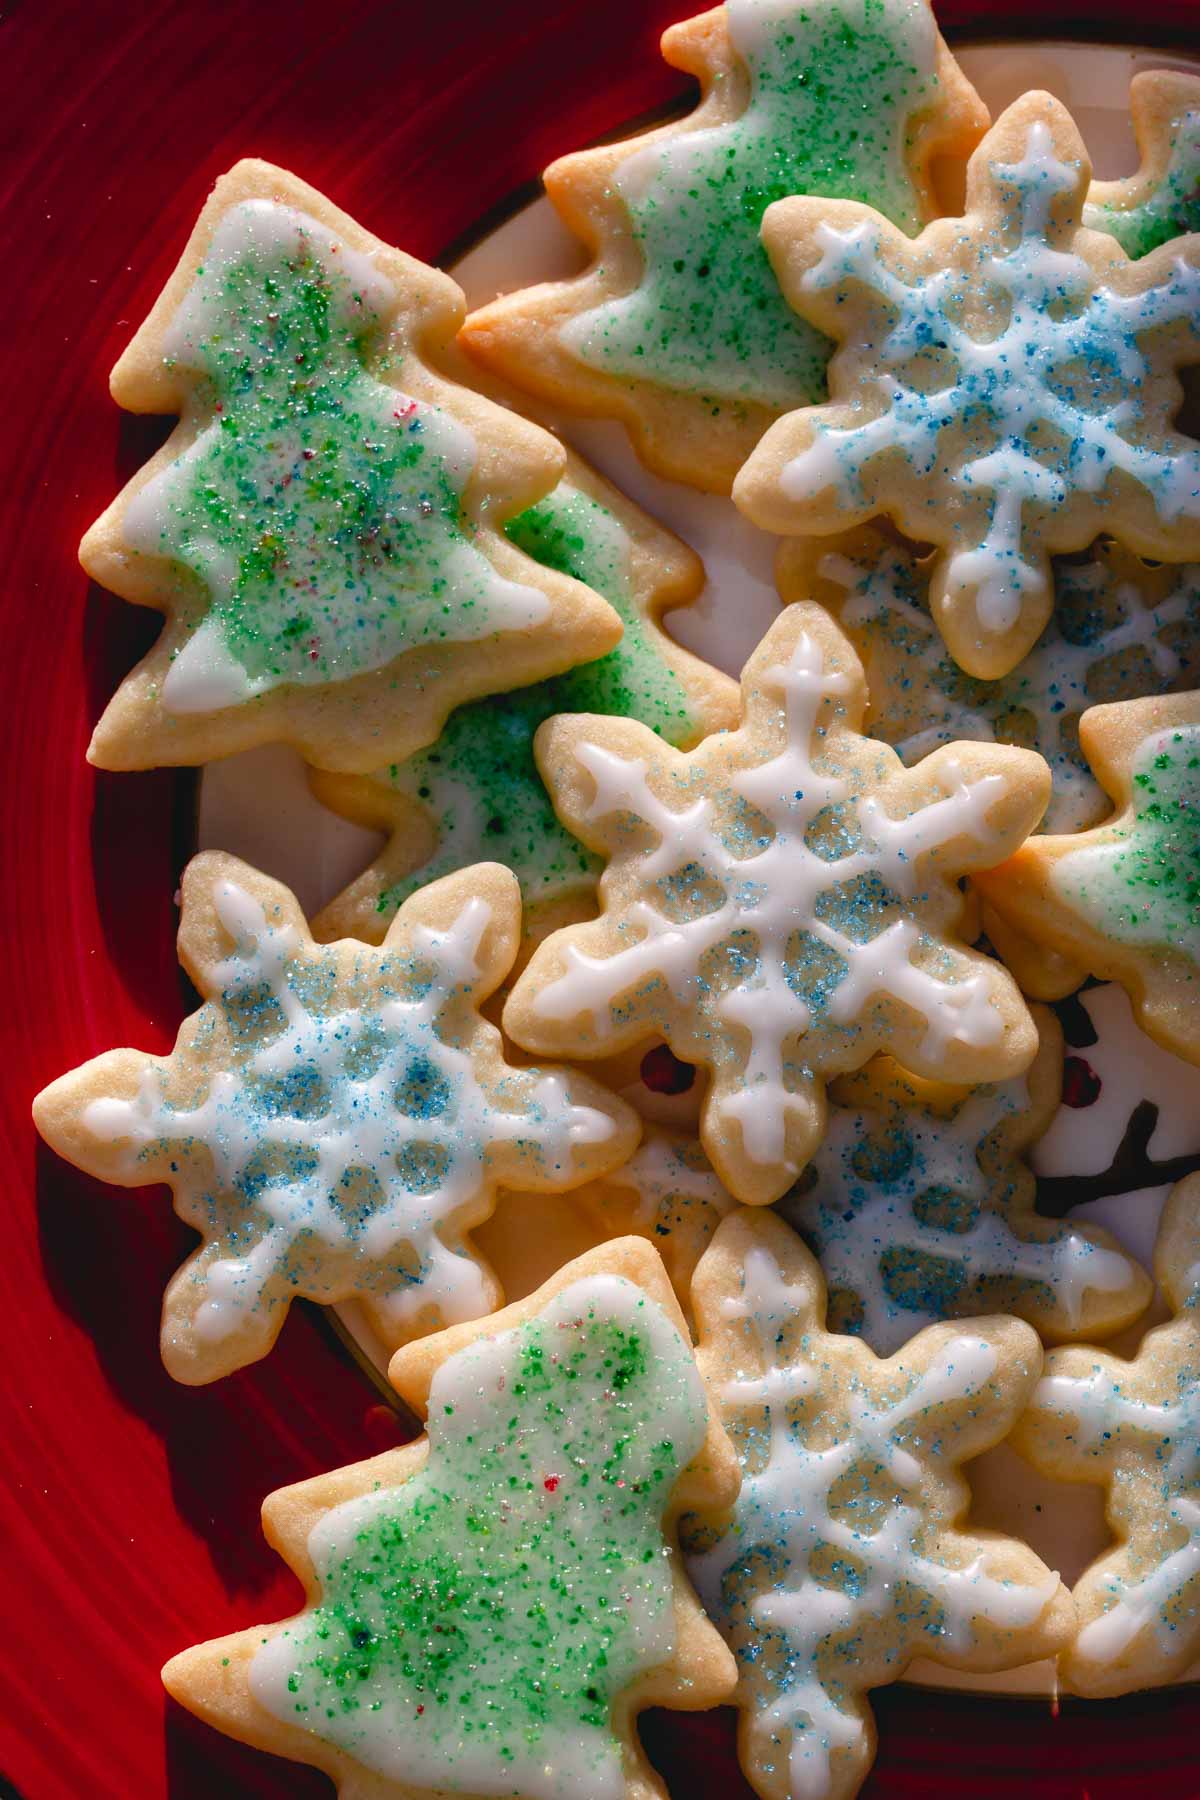 Decorated sugar cookies with colored sugar.